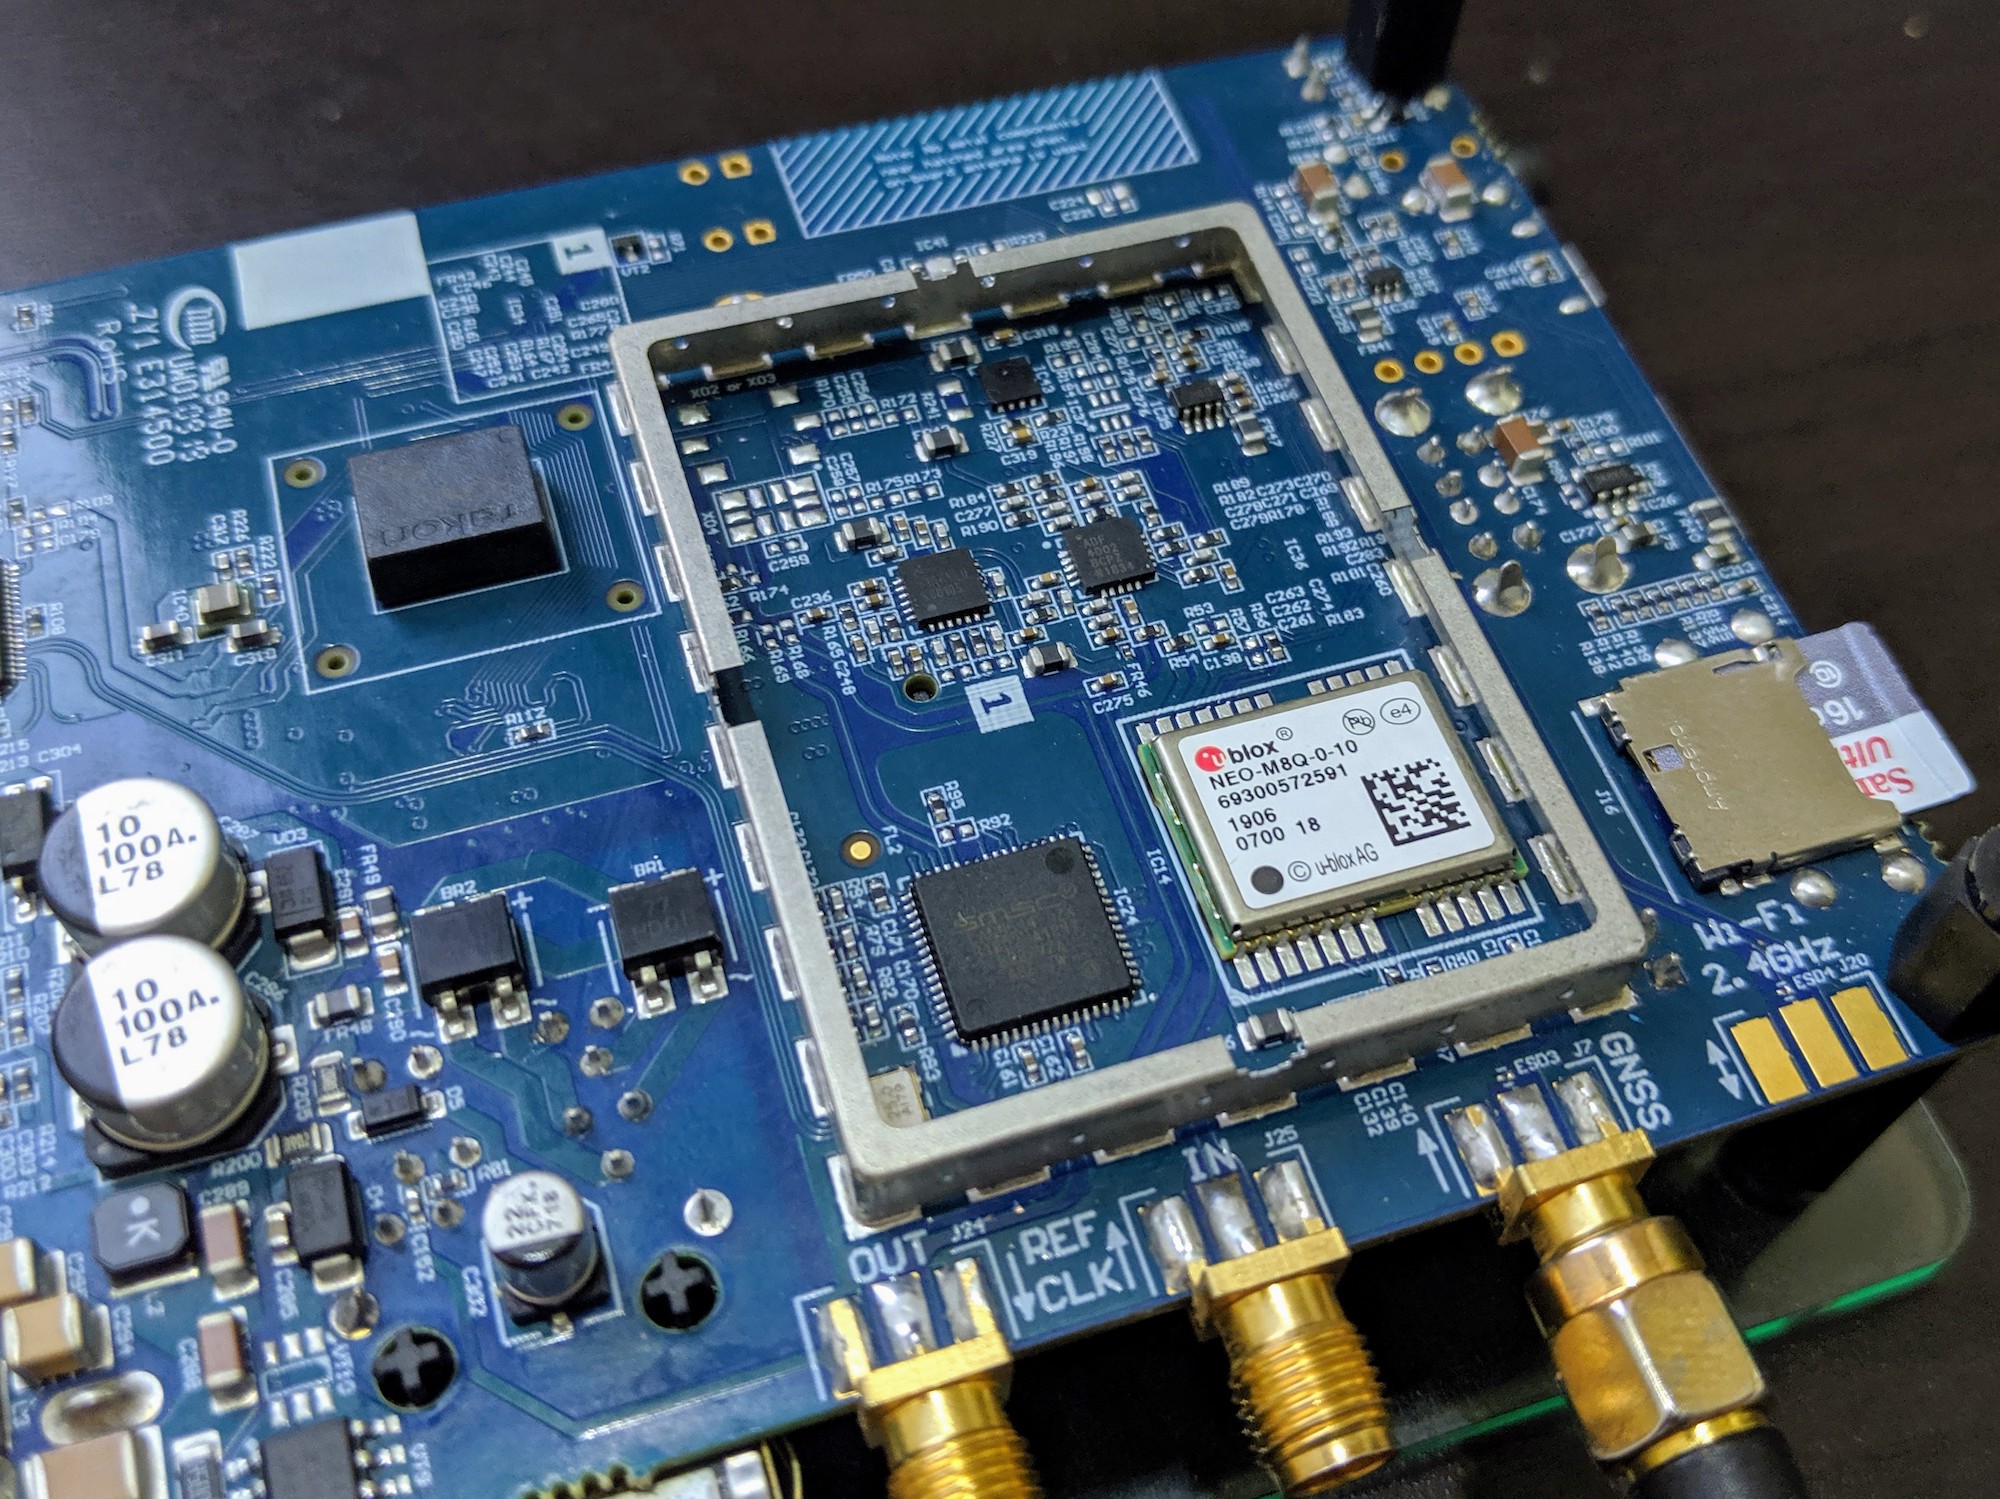 Monitoring GNSS Constellations with Galmon Using the LimeNET Micro Ublox-M8 Module